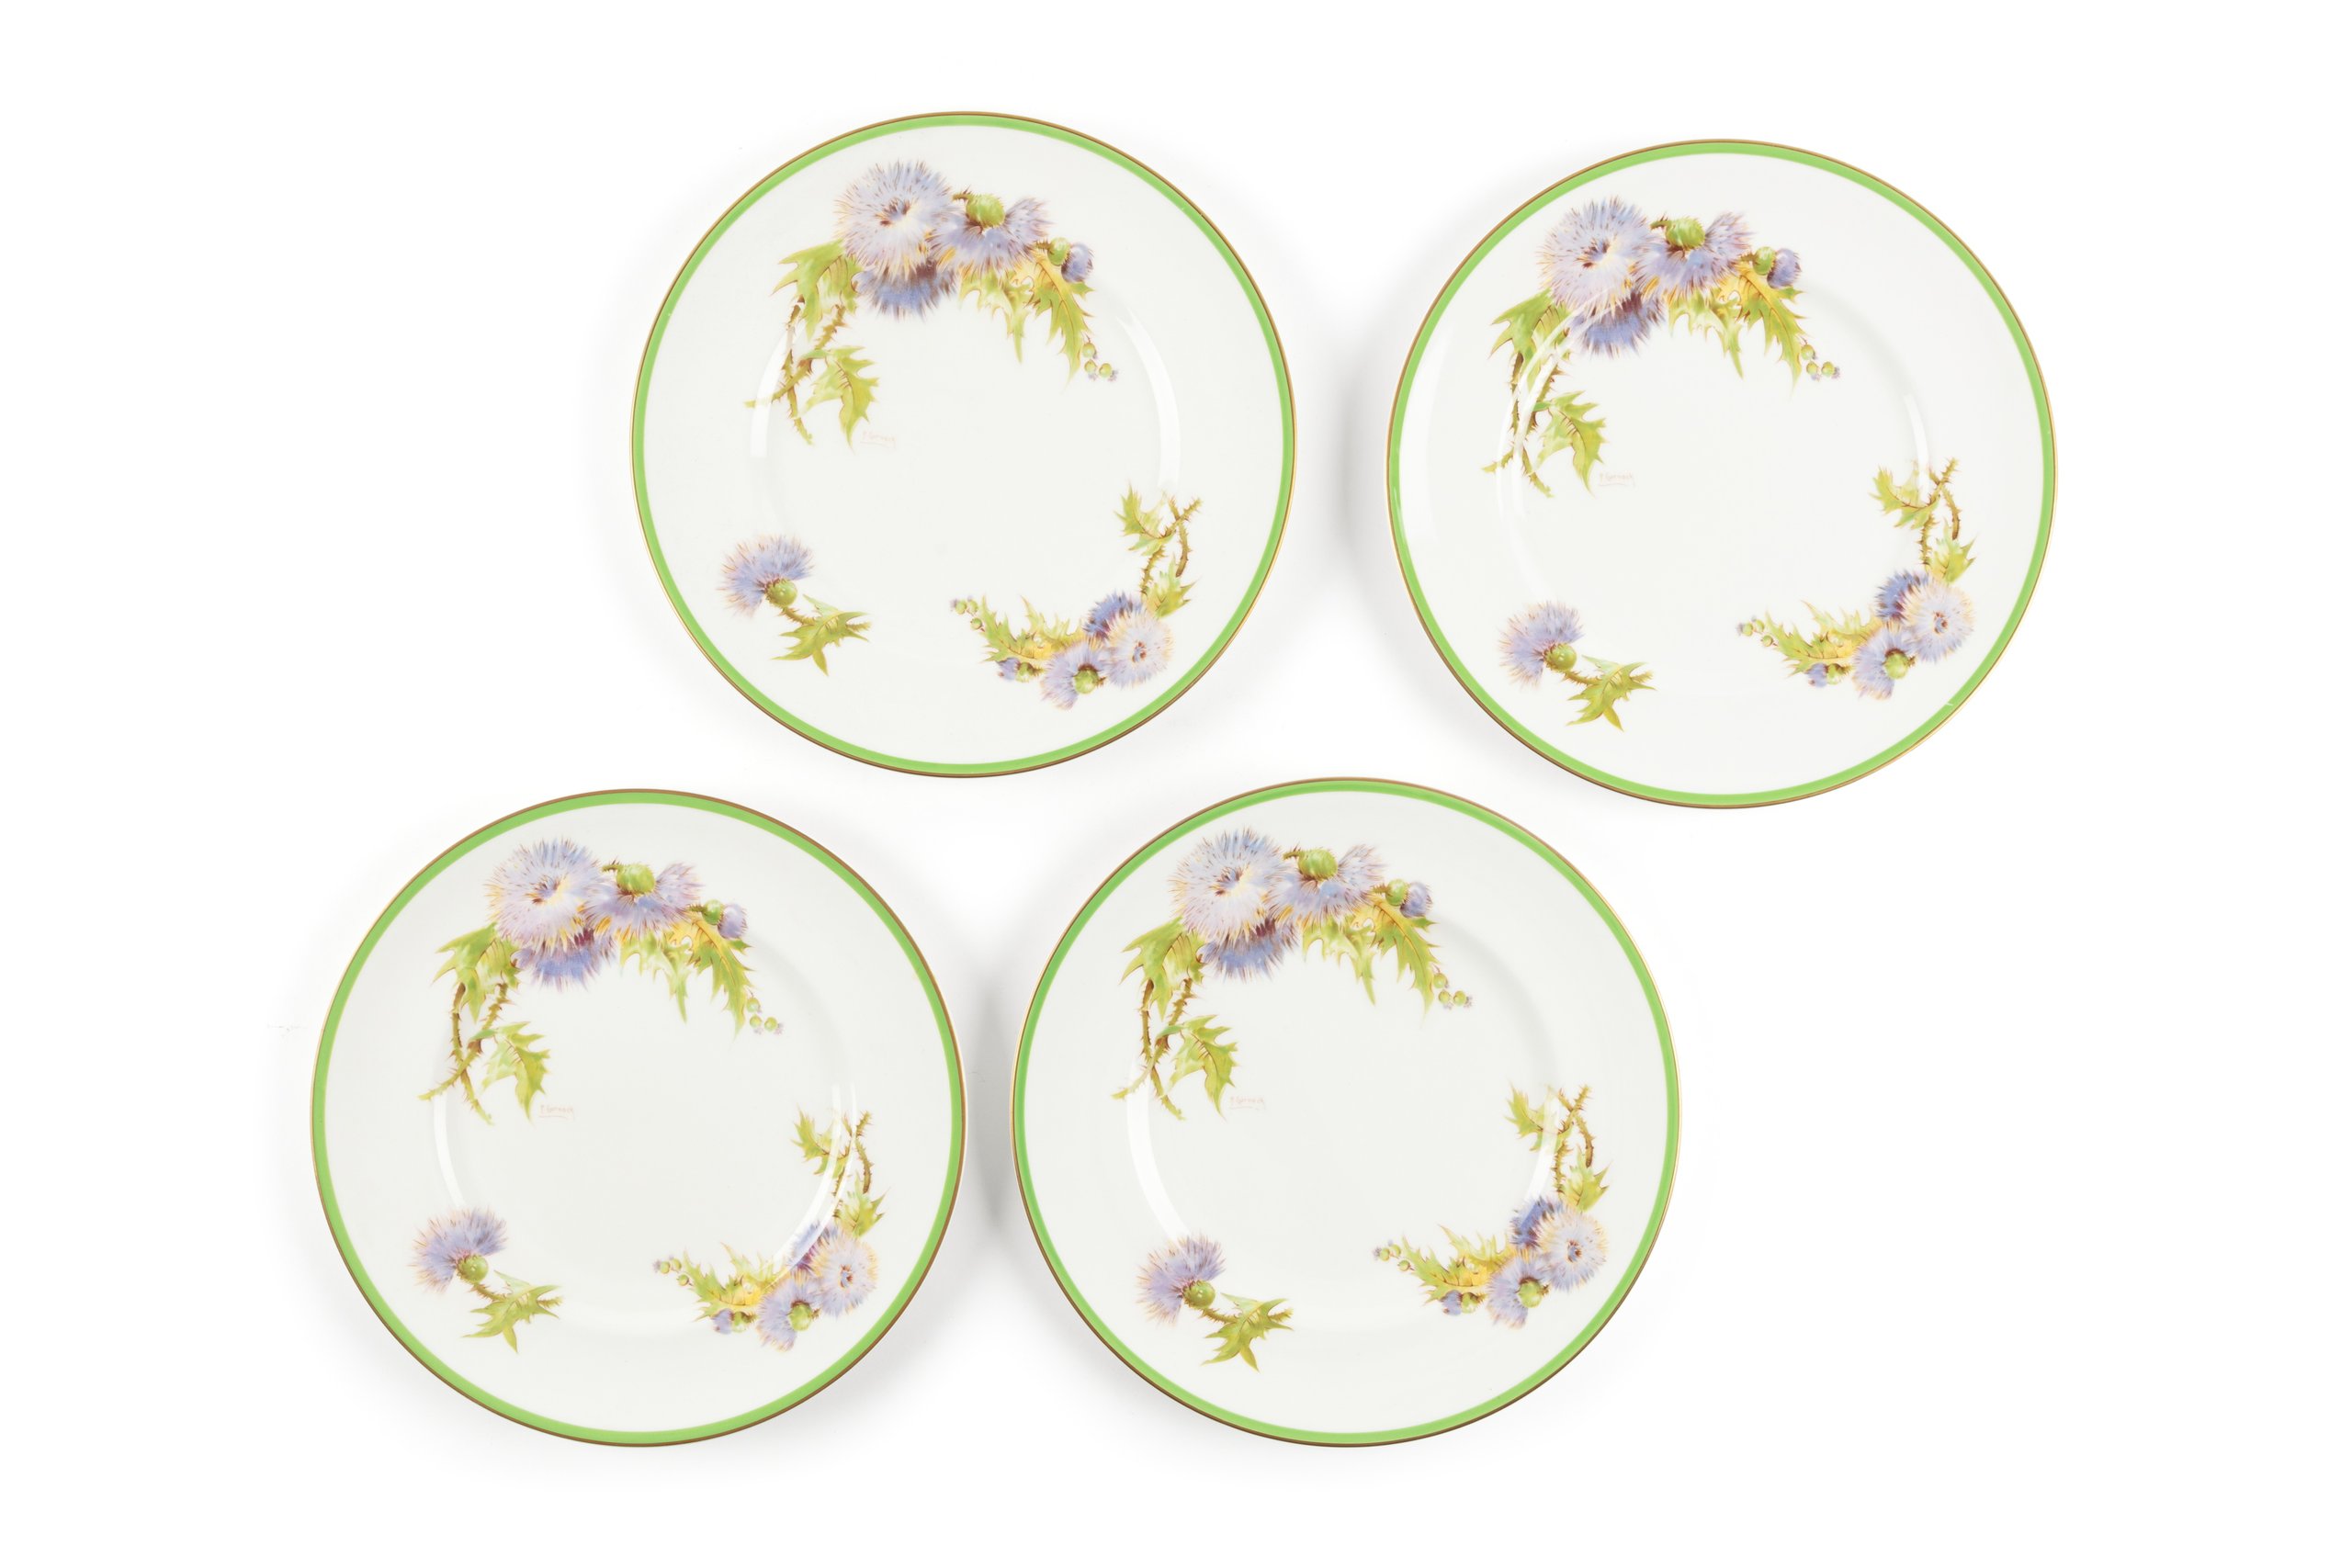 Dinner plates designed by Percy Curnock for Royal Doulton